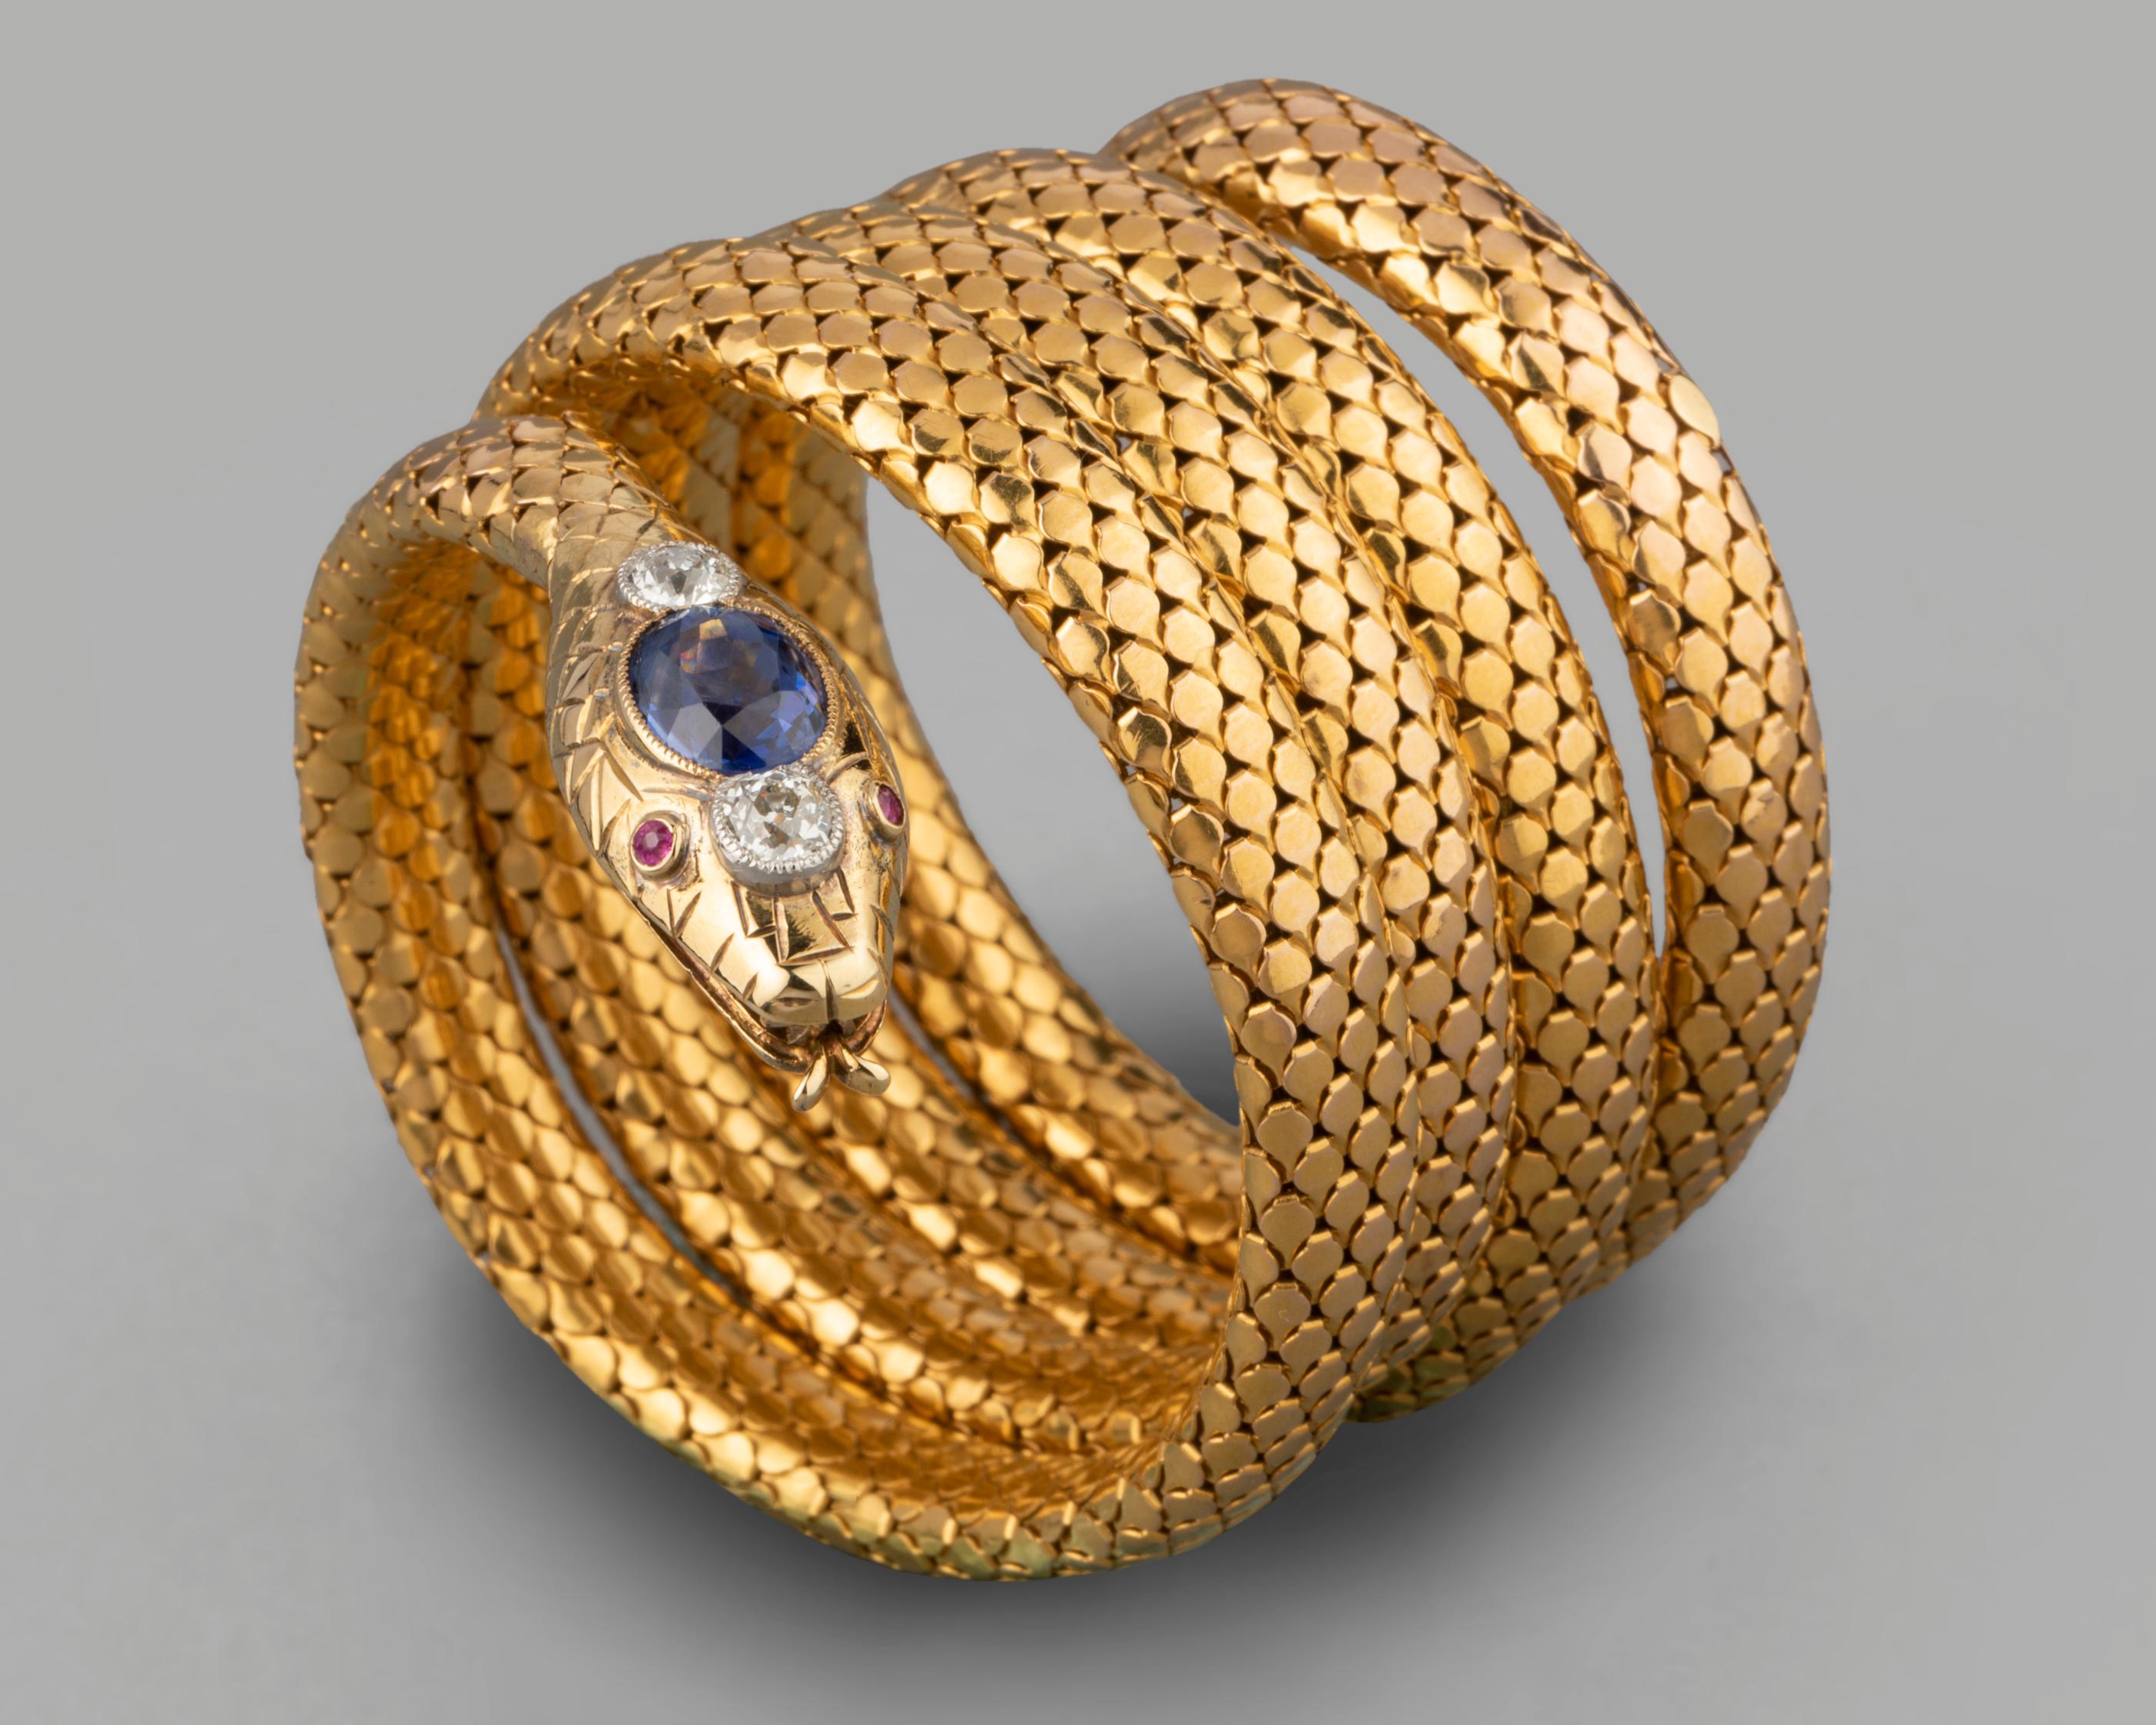 Antique Gold Diamonds and Sapphire French Snake Bracelet

Very beautiful bracelet, made in France circa 1870.
Made in yellow gold 18k (multiple mark, the eagle head). The diamonds weights 0.40 carats each. Mark of patent (certifié SGDG).
The